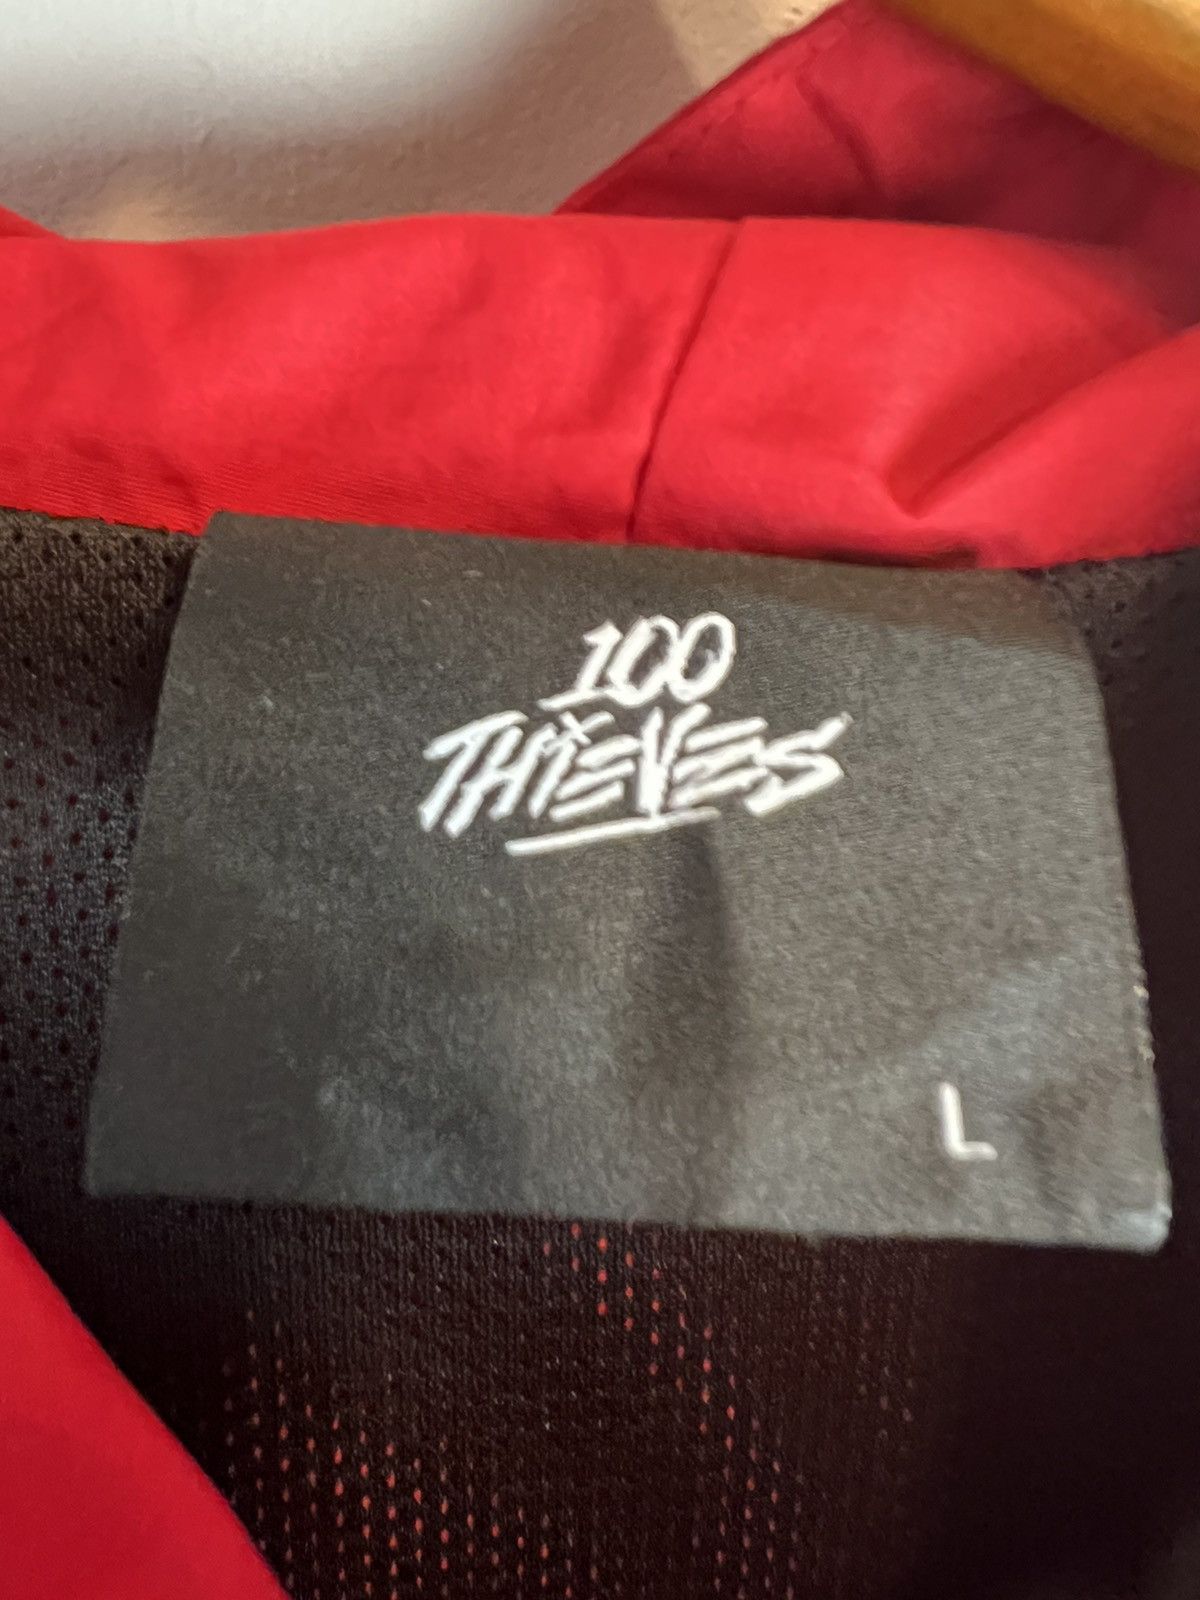 100 Thieves 100 thieves windbreaker jacket Size US L / EU 52-54 / 3 - 3 Preview